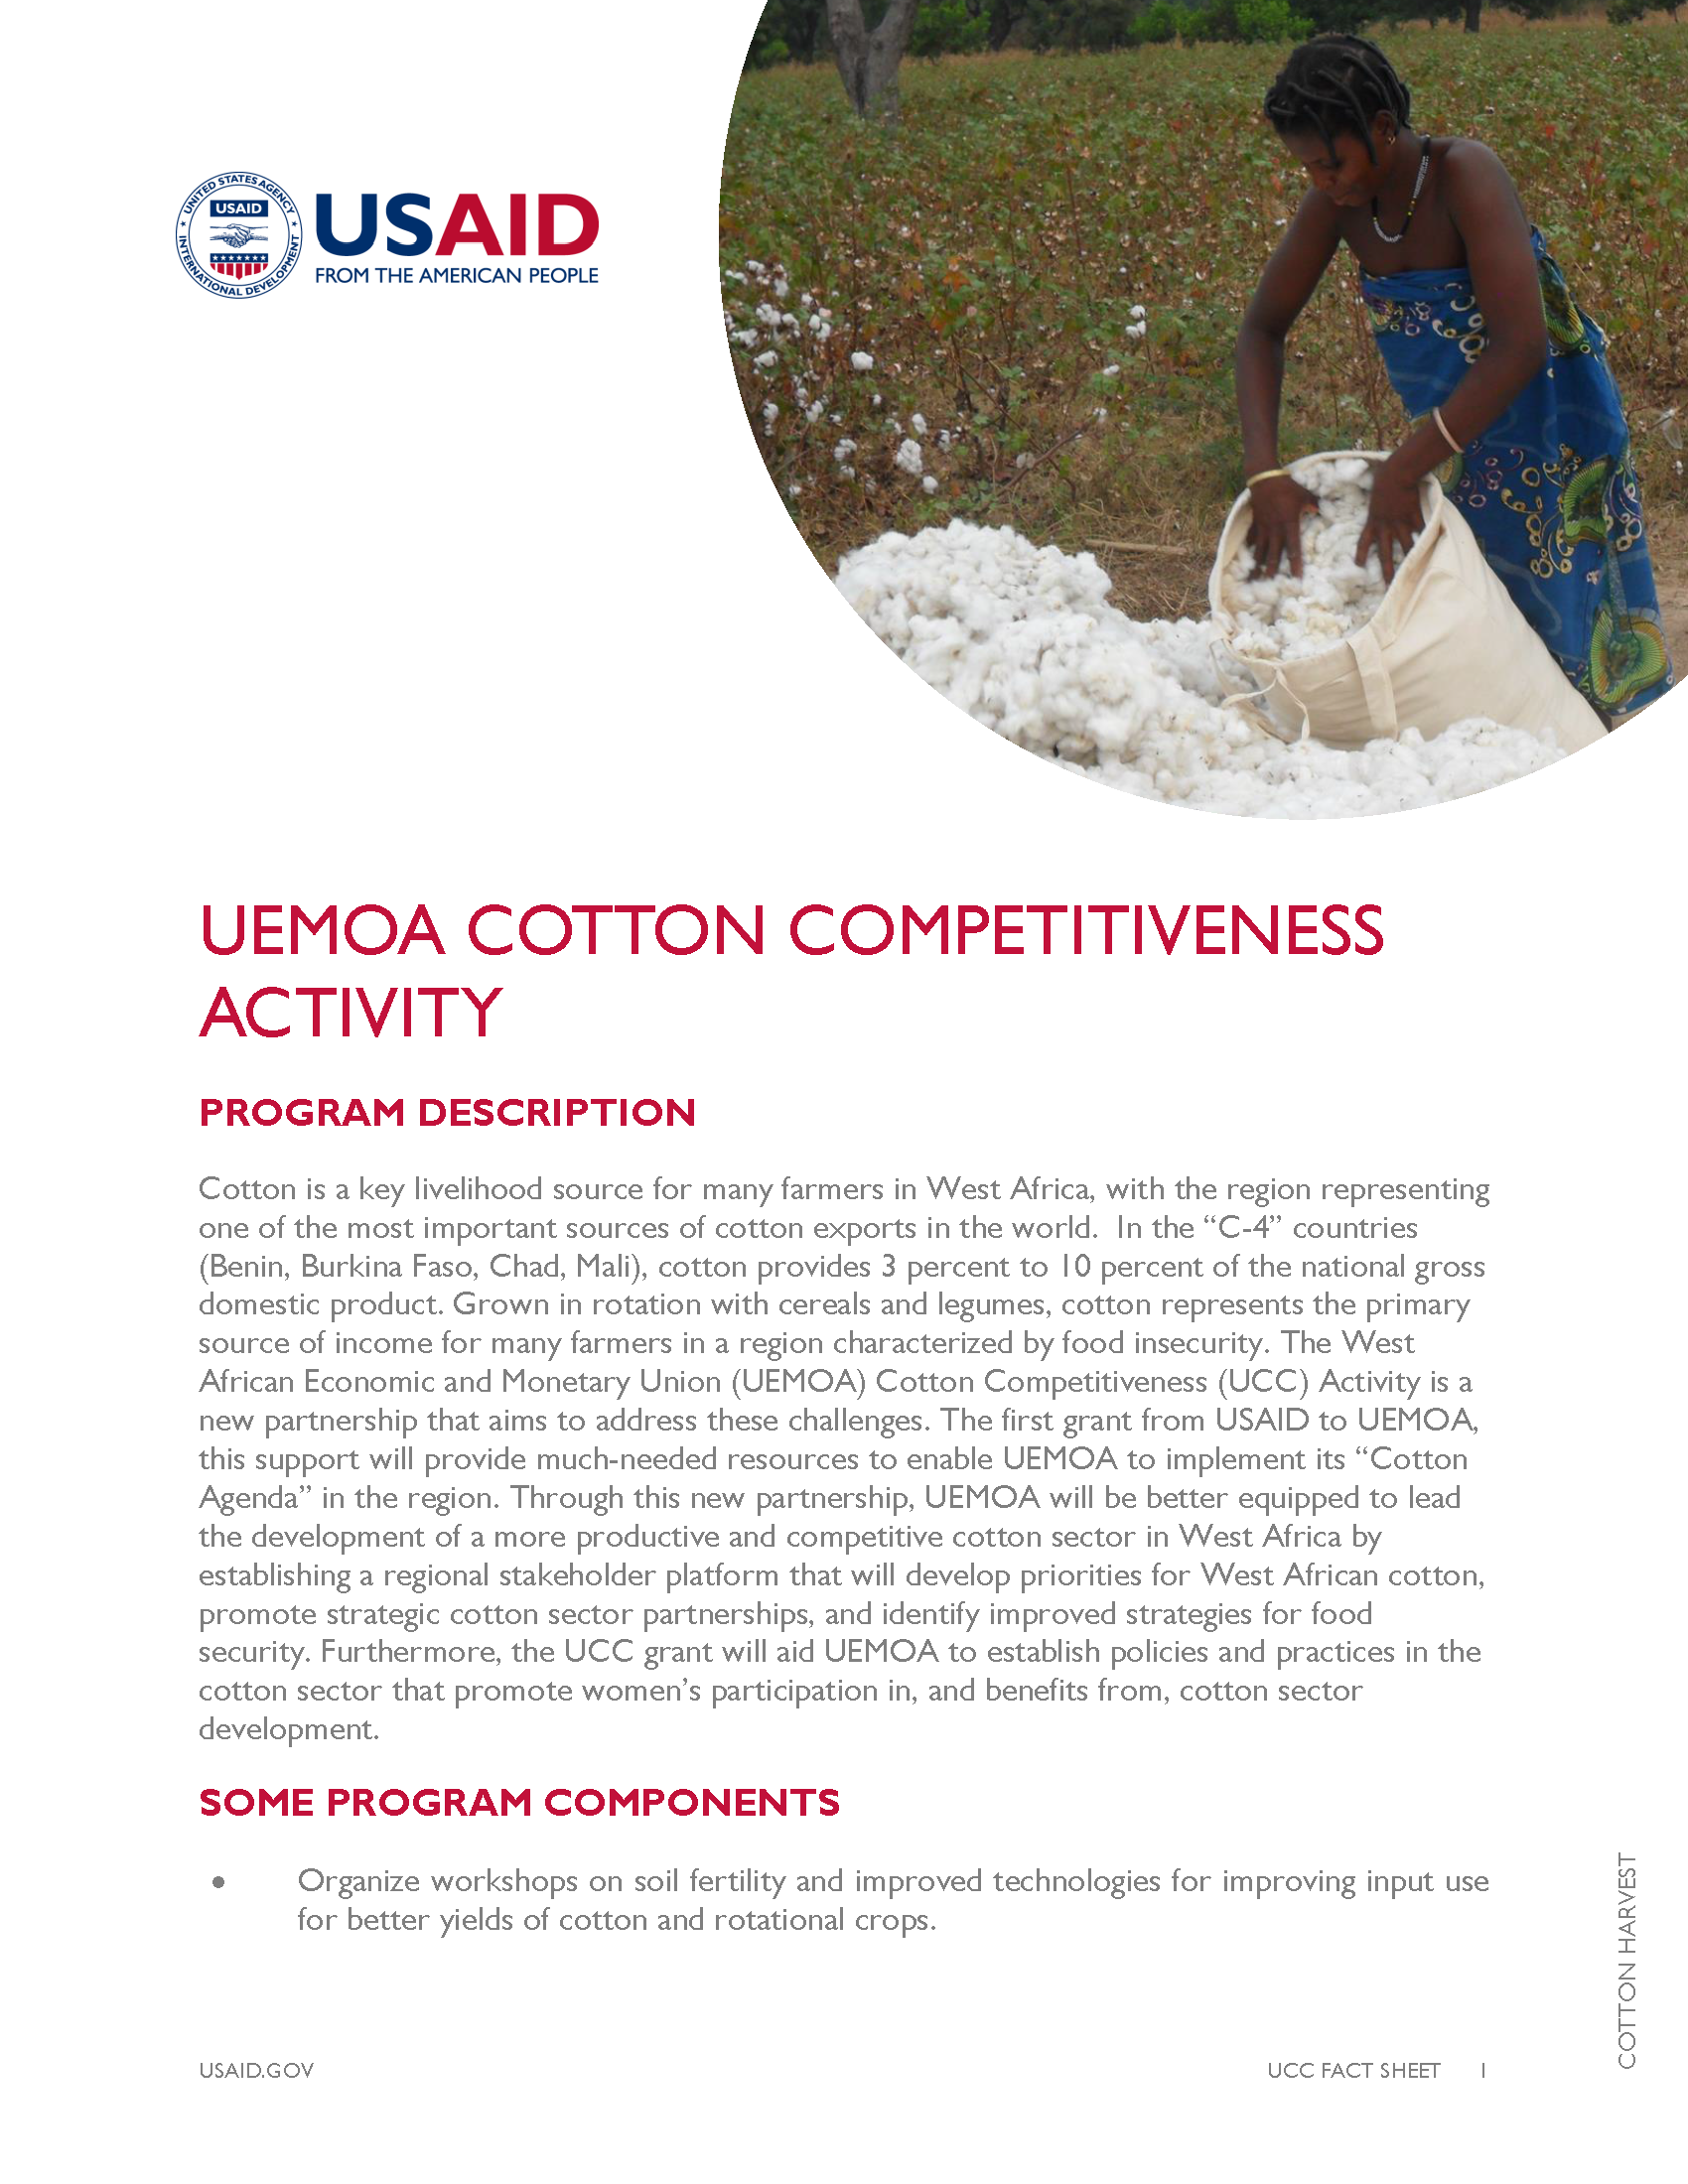 Fact Sheet on the UEMOA Cotton Competitiveness Activity